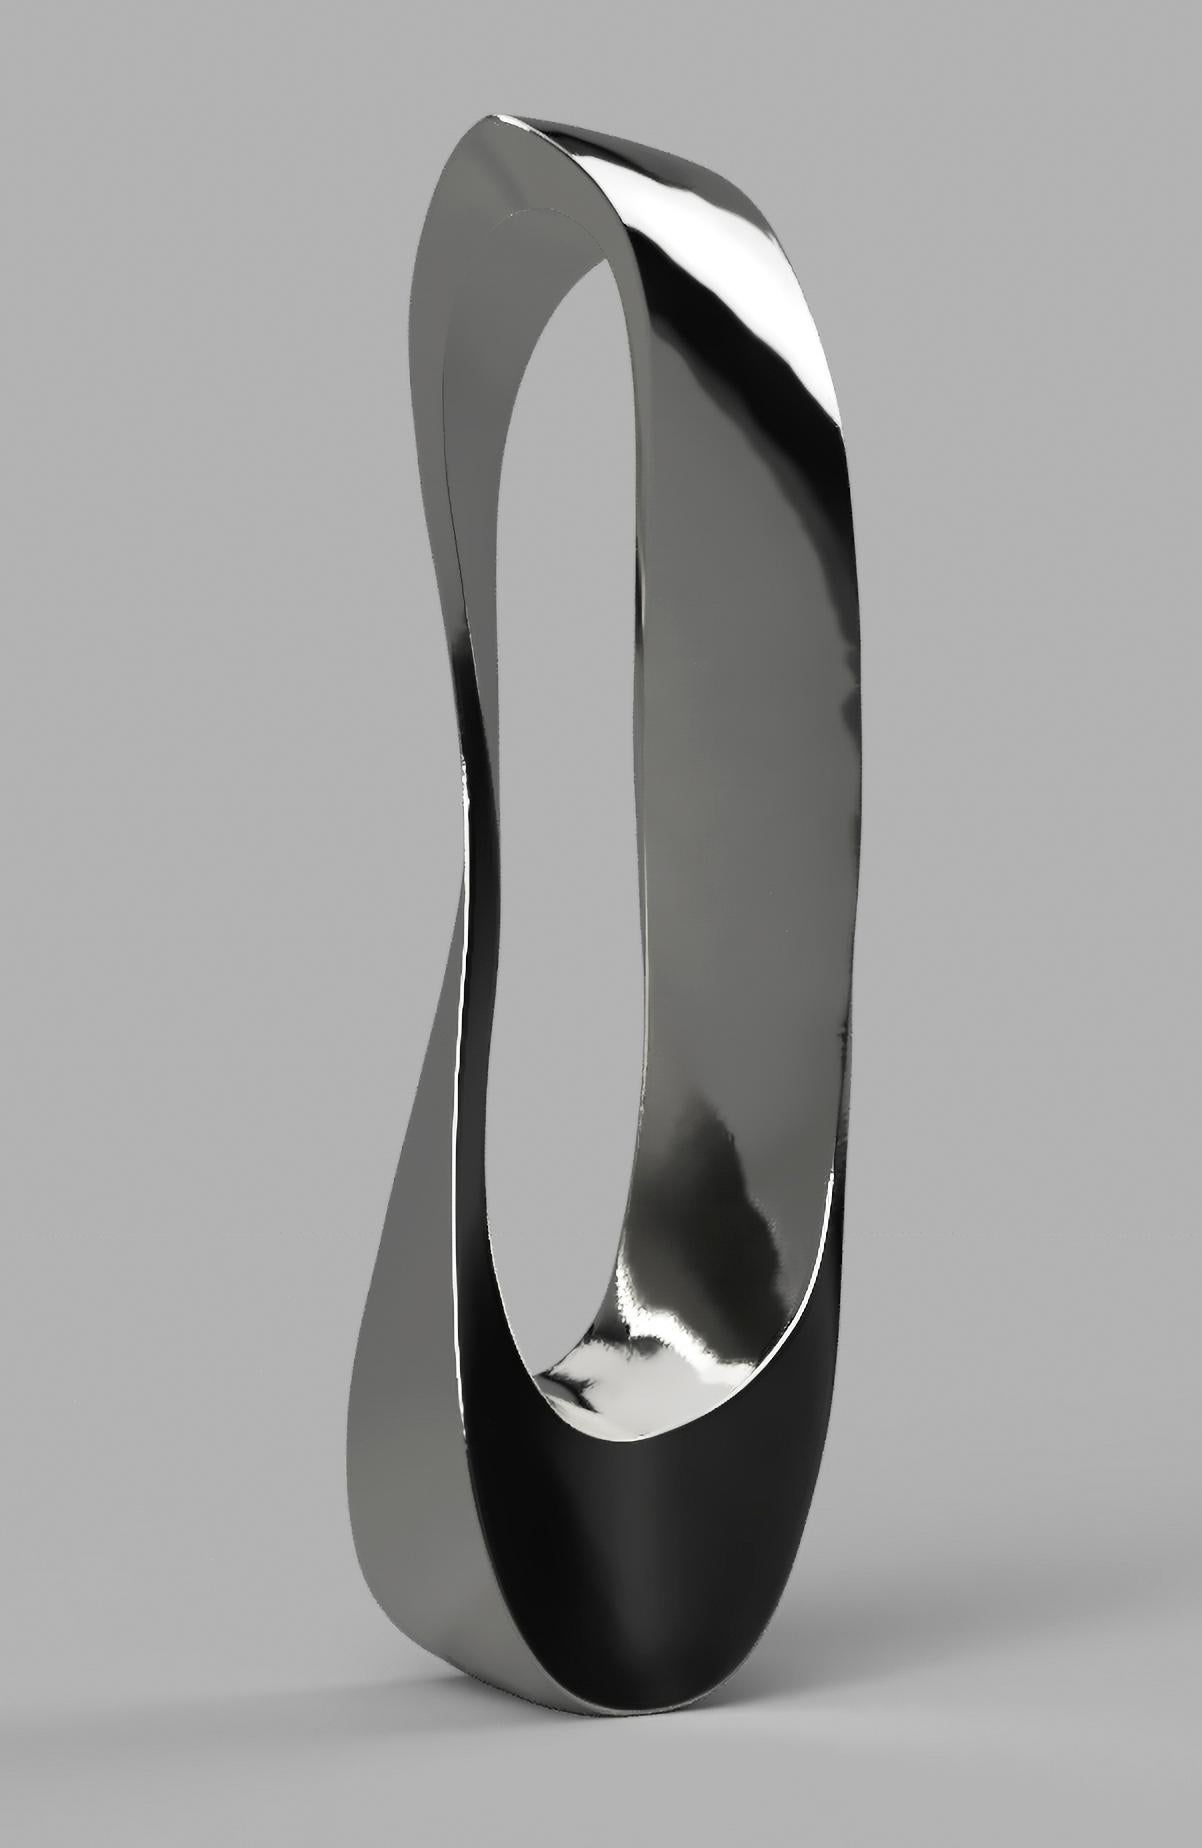 Mobius H9 SS 2/50 - large, abstract, polished stainless steel, outdoor sculpture - Gray Abstract Sculpture by Jeremy Guy